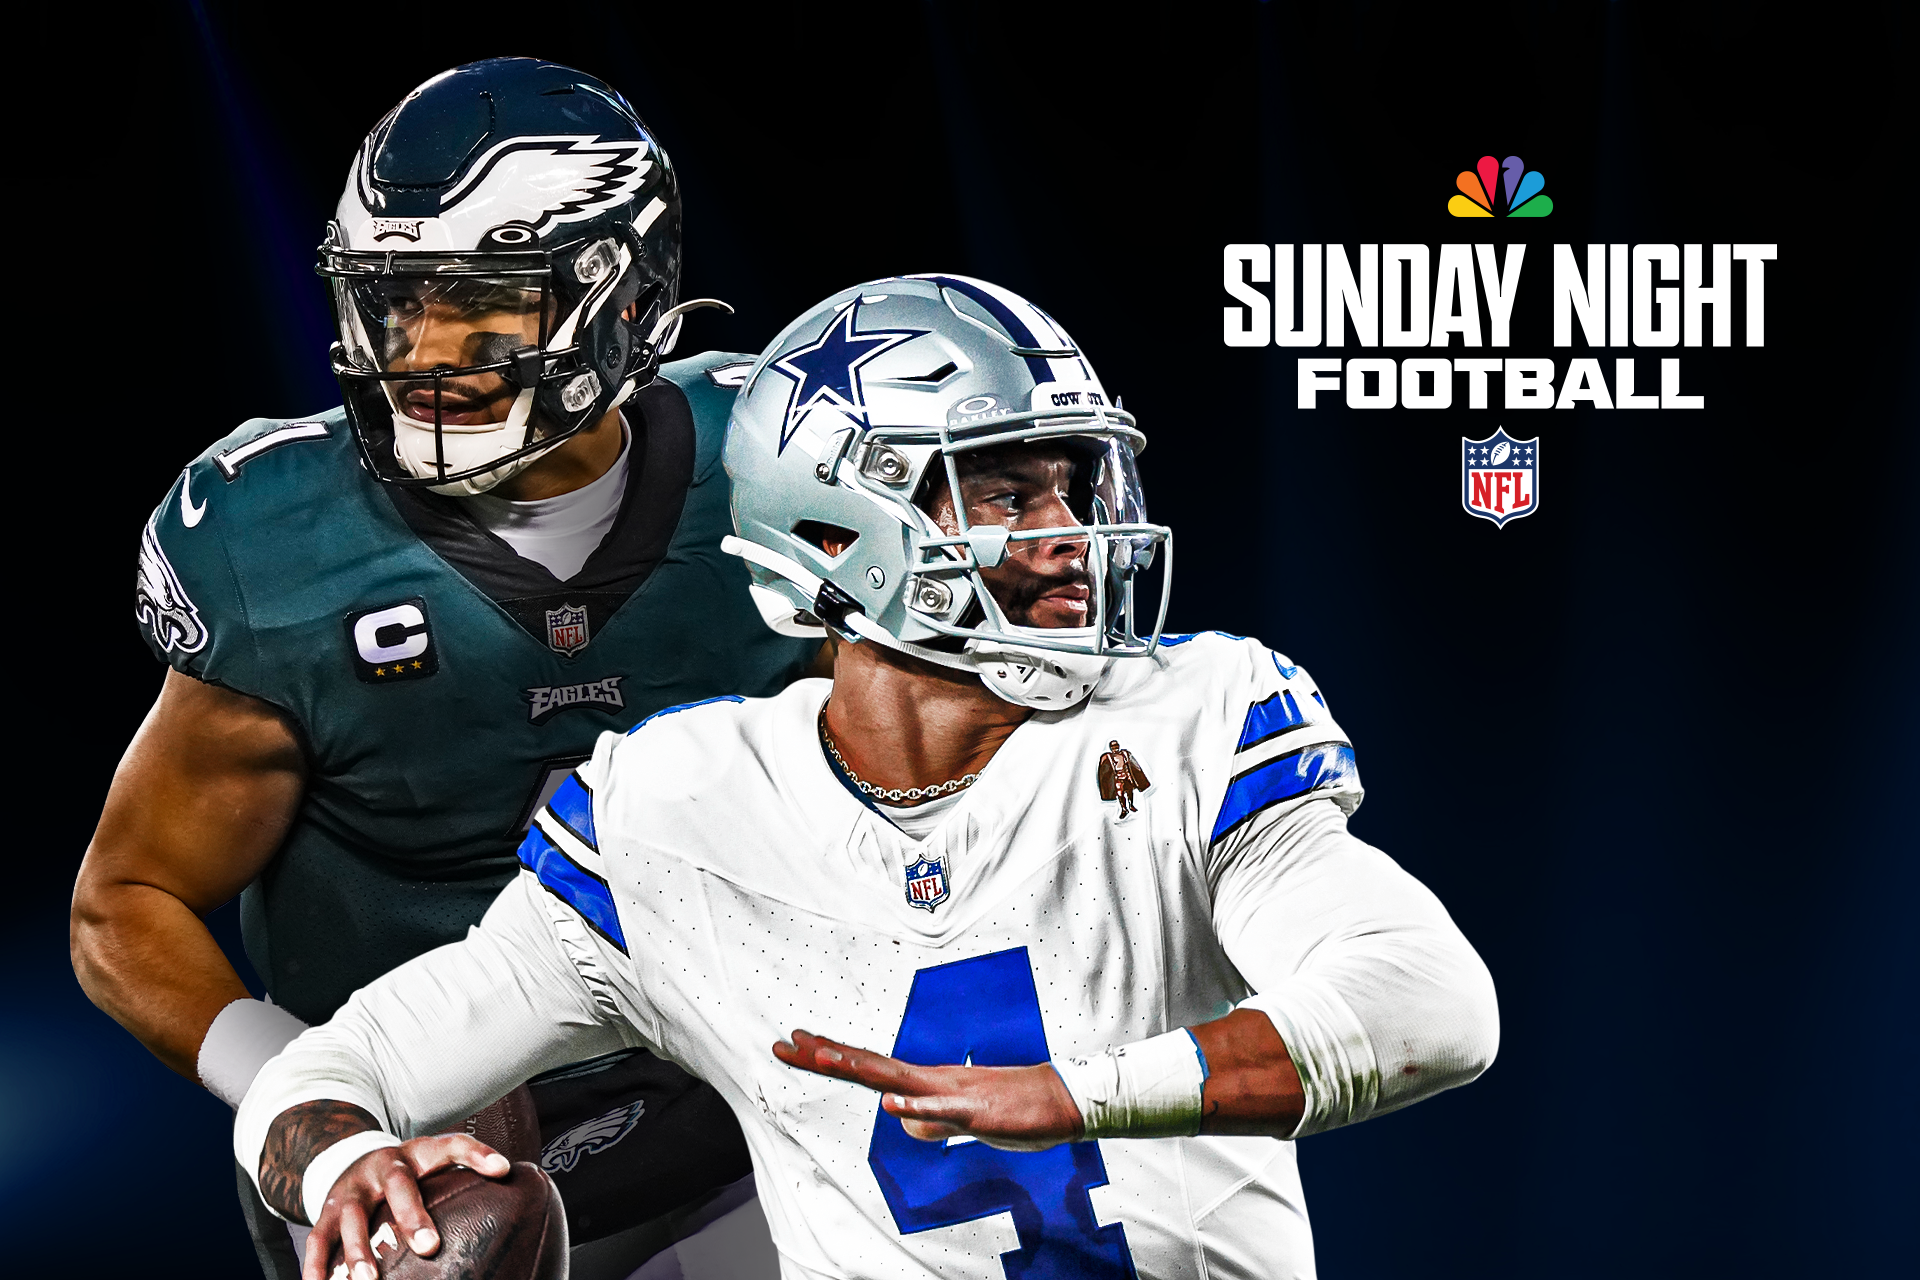 Eagles vs. Cowboys: How to Watch on Peacock